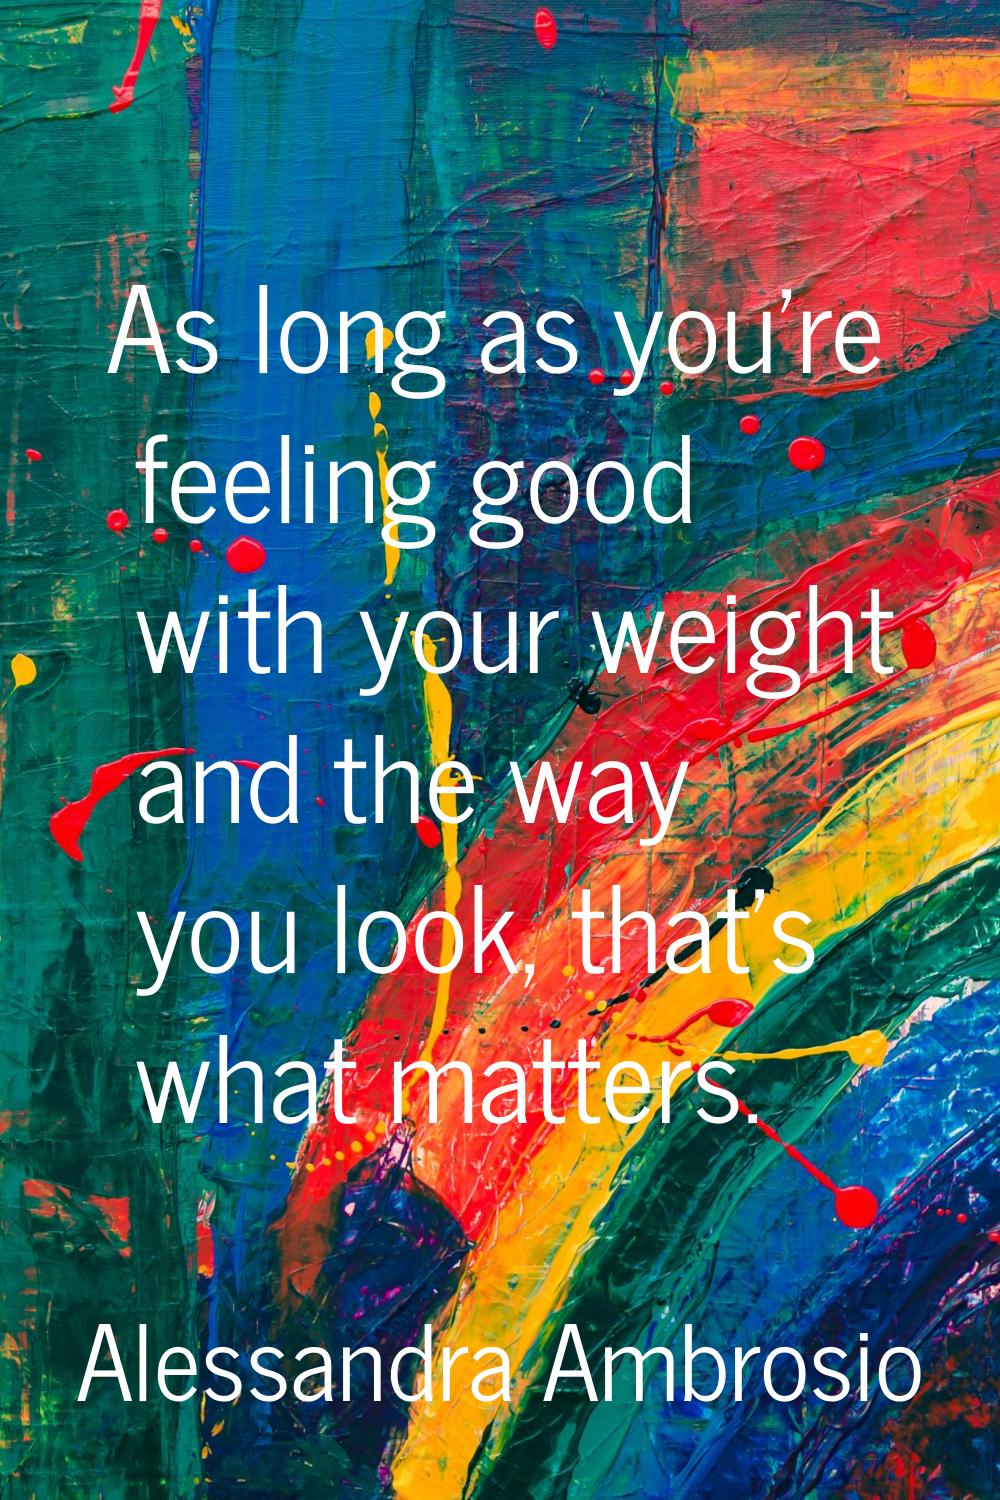 As long as you're feeling good with your weight and the way you look, that's what matters.